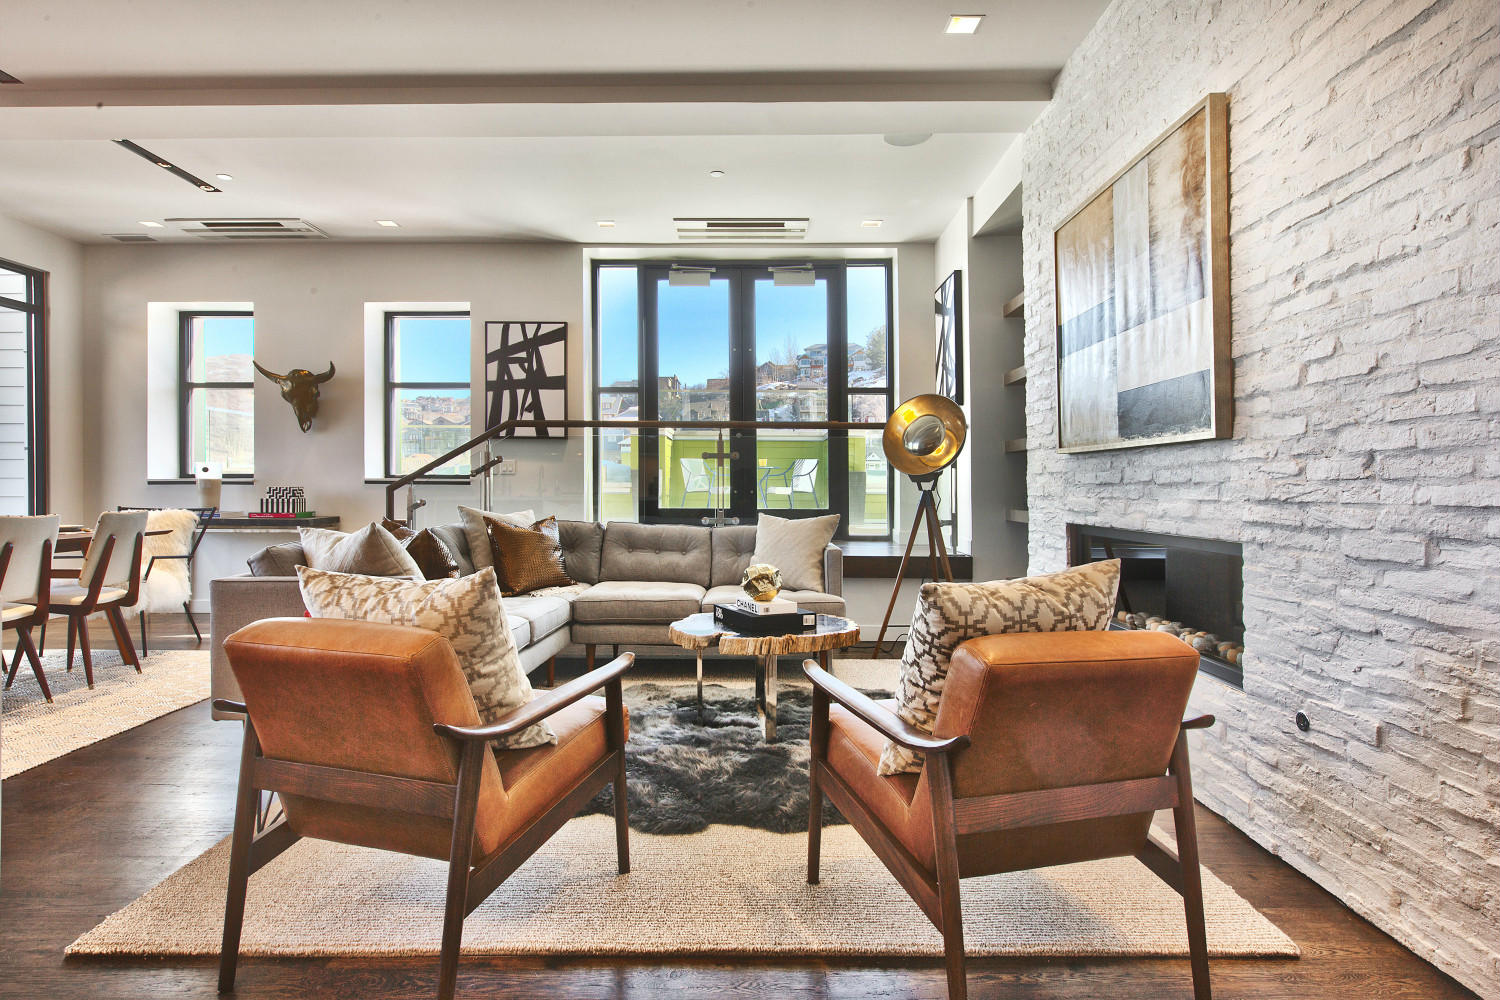 Current Home Trends in Park City, Utah